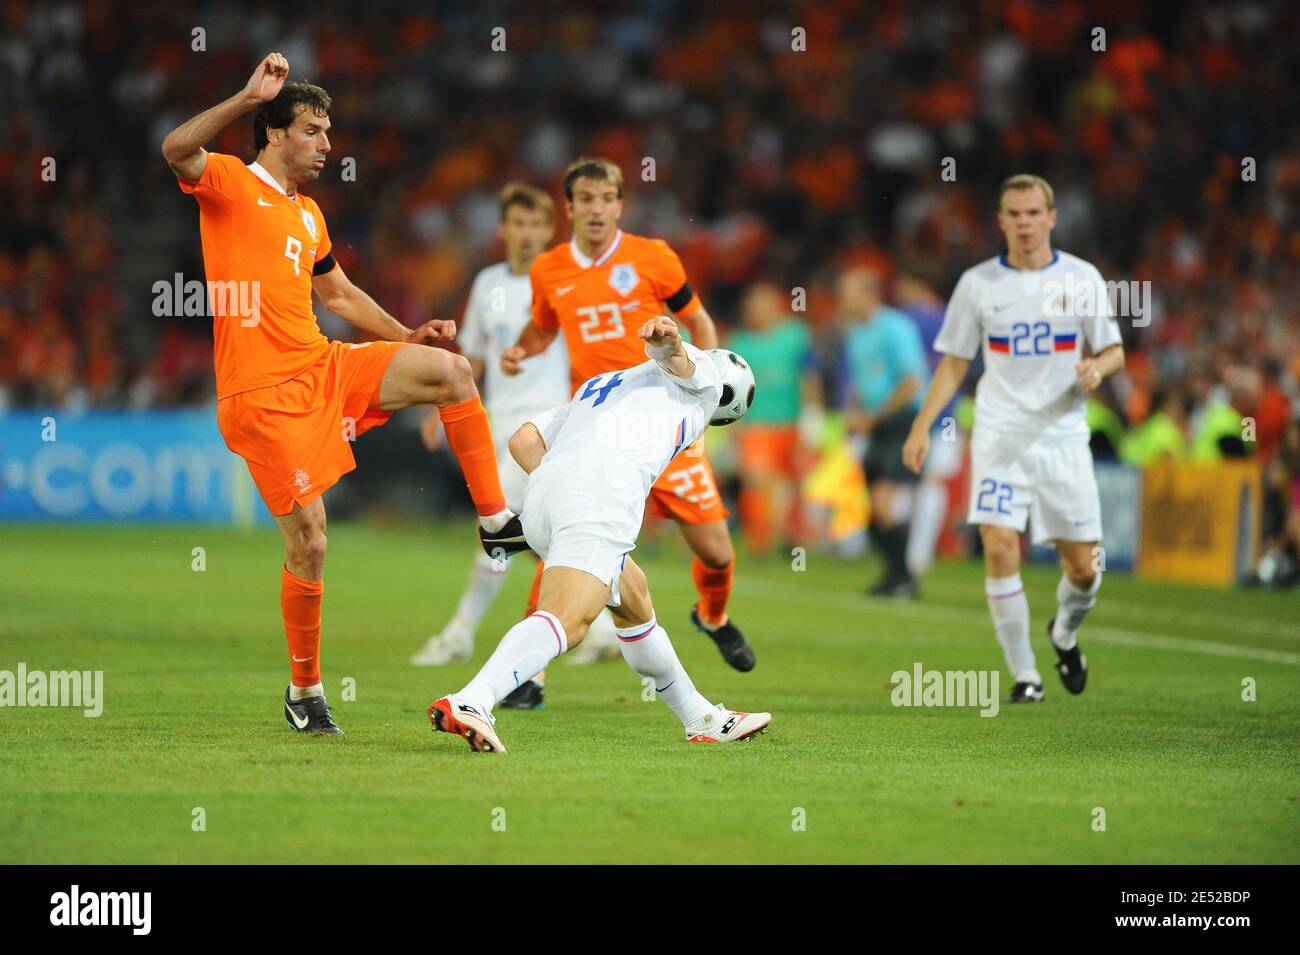 Russia's Sergei Ignashevich heads the ball during the Euro 2008 UEFA European Championship 2008, quarter final soccer match, Netherlands vs Russia at the St. Jakob-Park stadium in Basel, Switzerland on June 21, 2008. Russia won 1-3. Photo by Steeve McMay/Cameleon/ABACAPRESS.COM Stock Photo